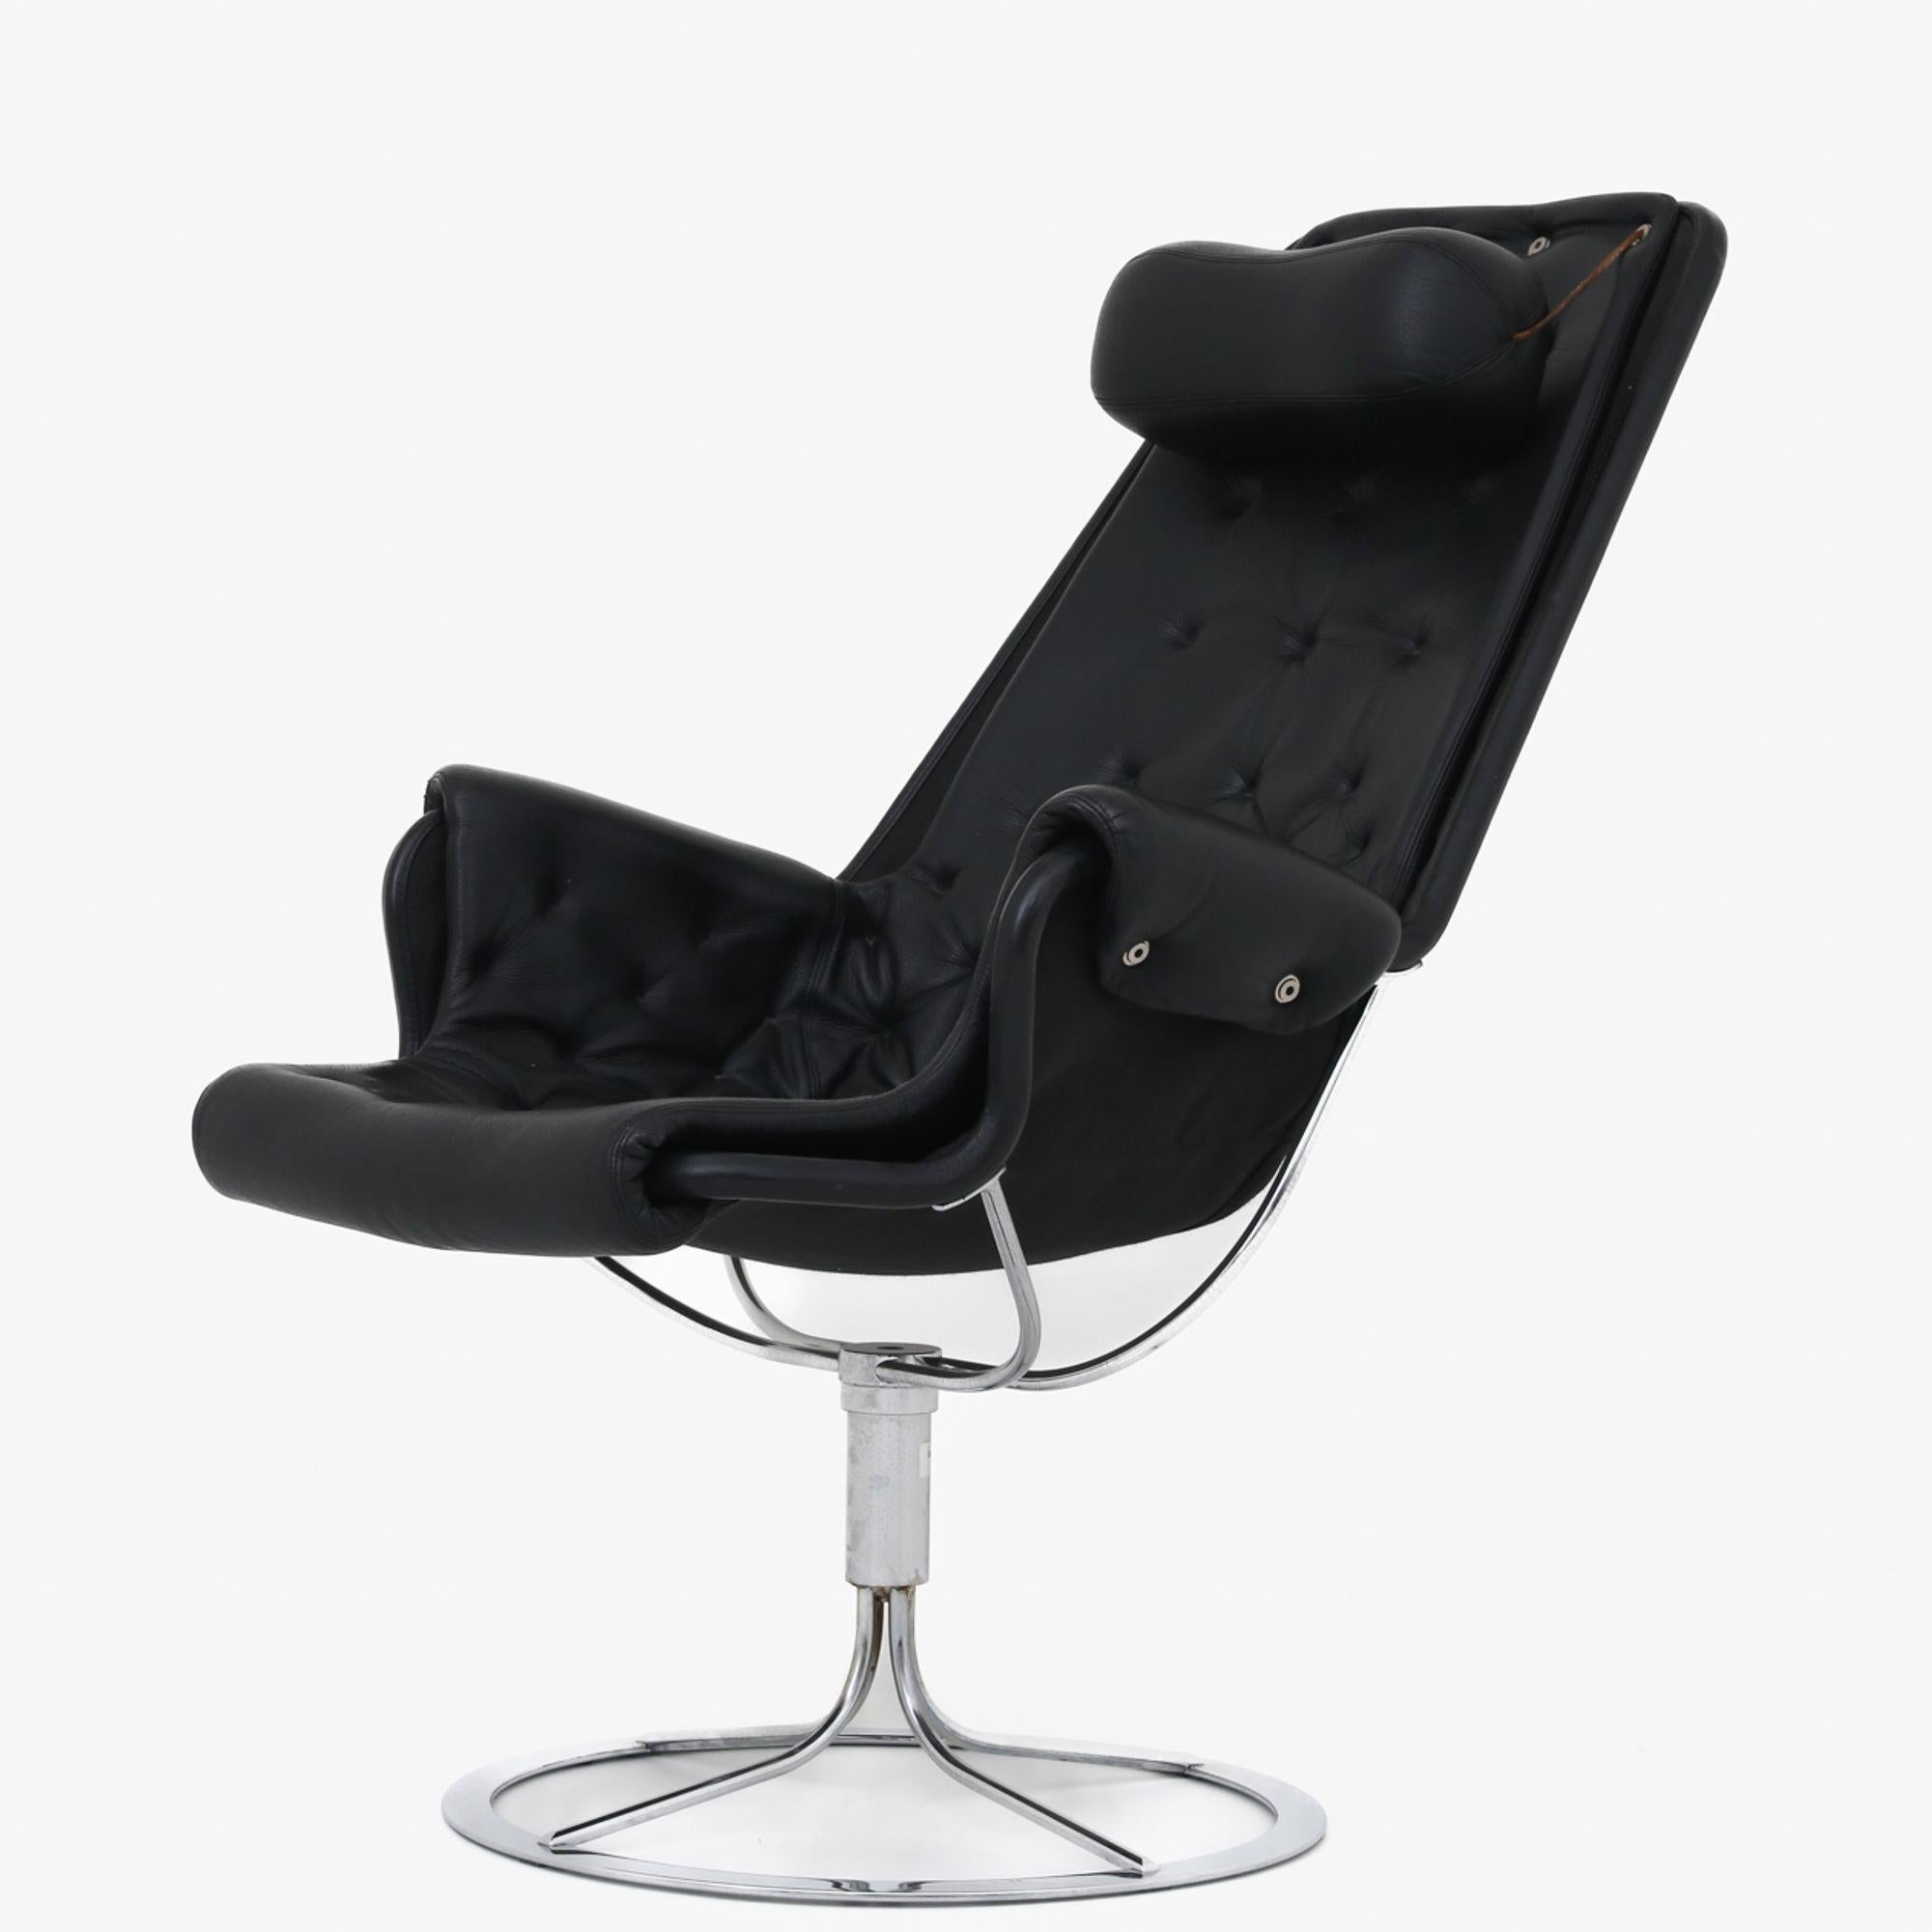 Set of 2 Model 'Jetson' - Lounge chairs in patinated black leather on metal frame. Bruno Mathsson / Dux